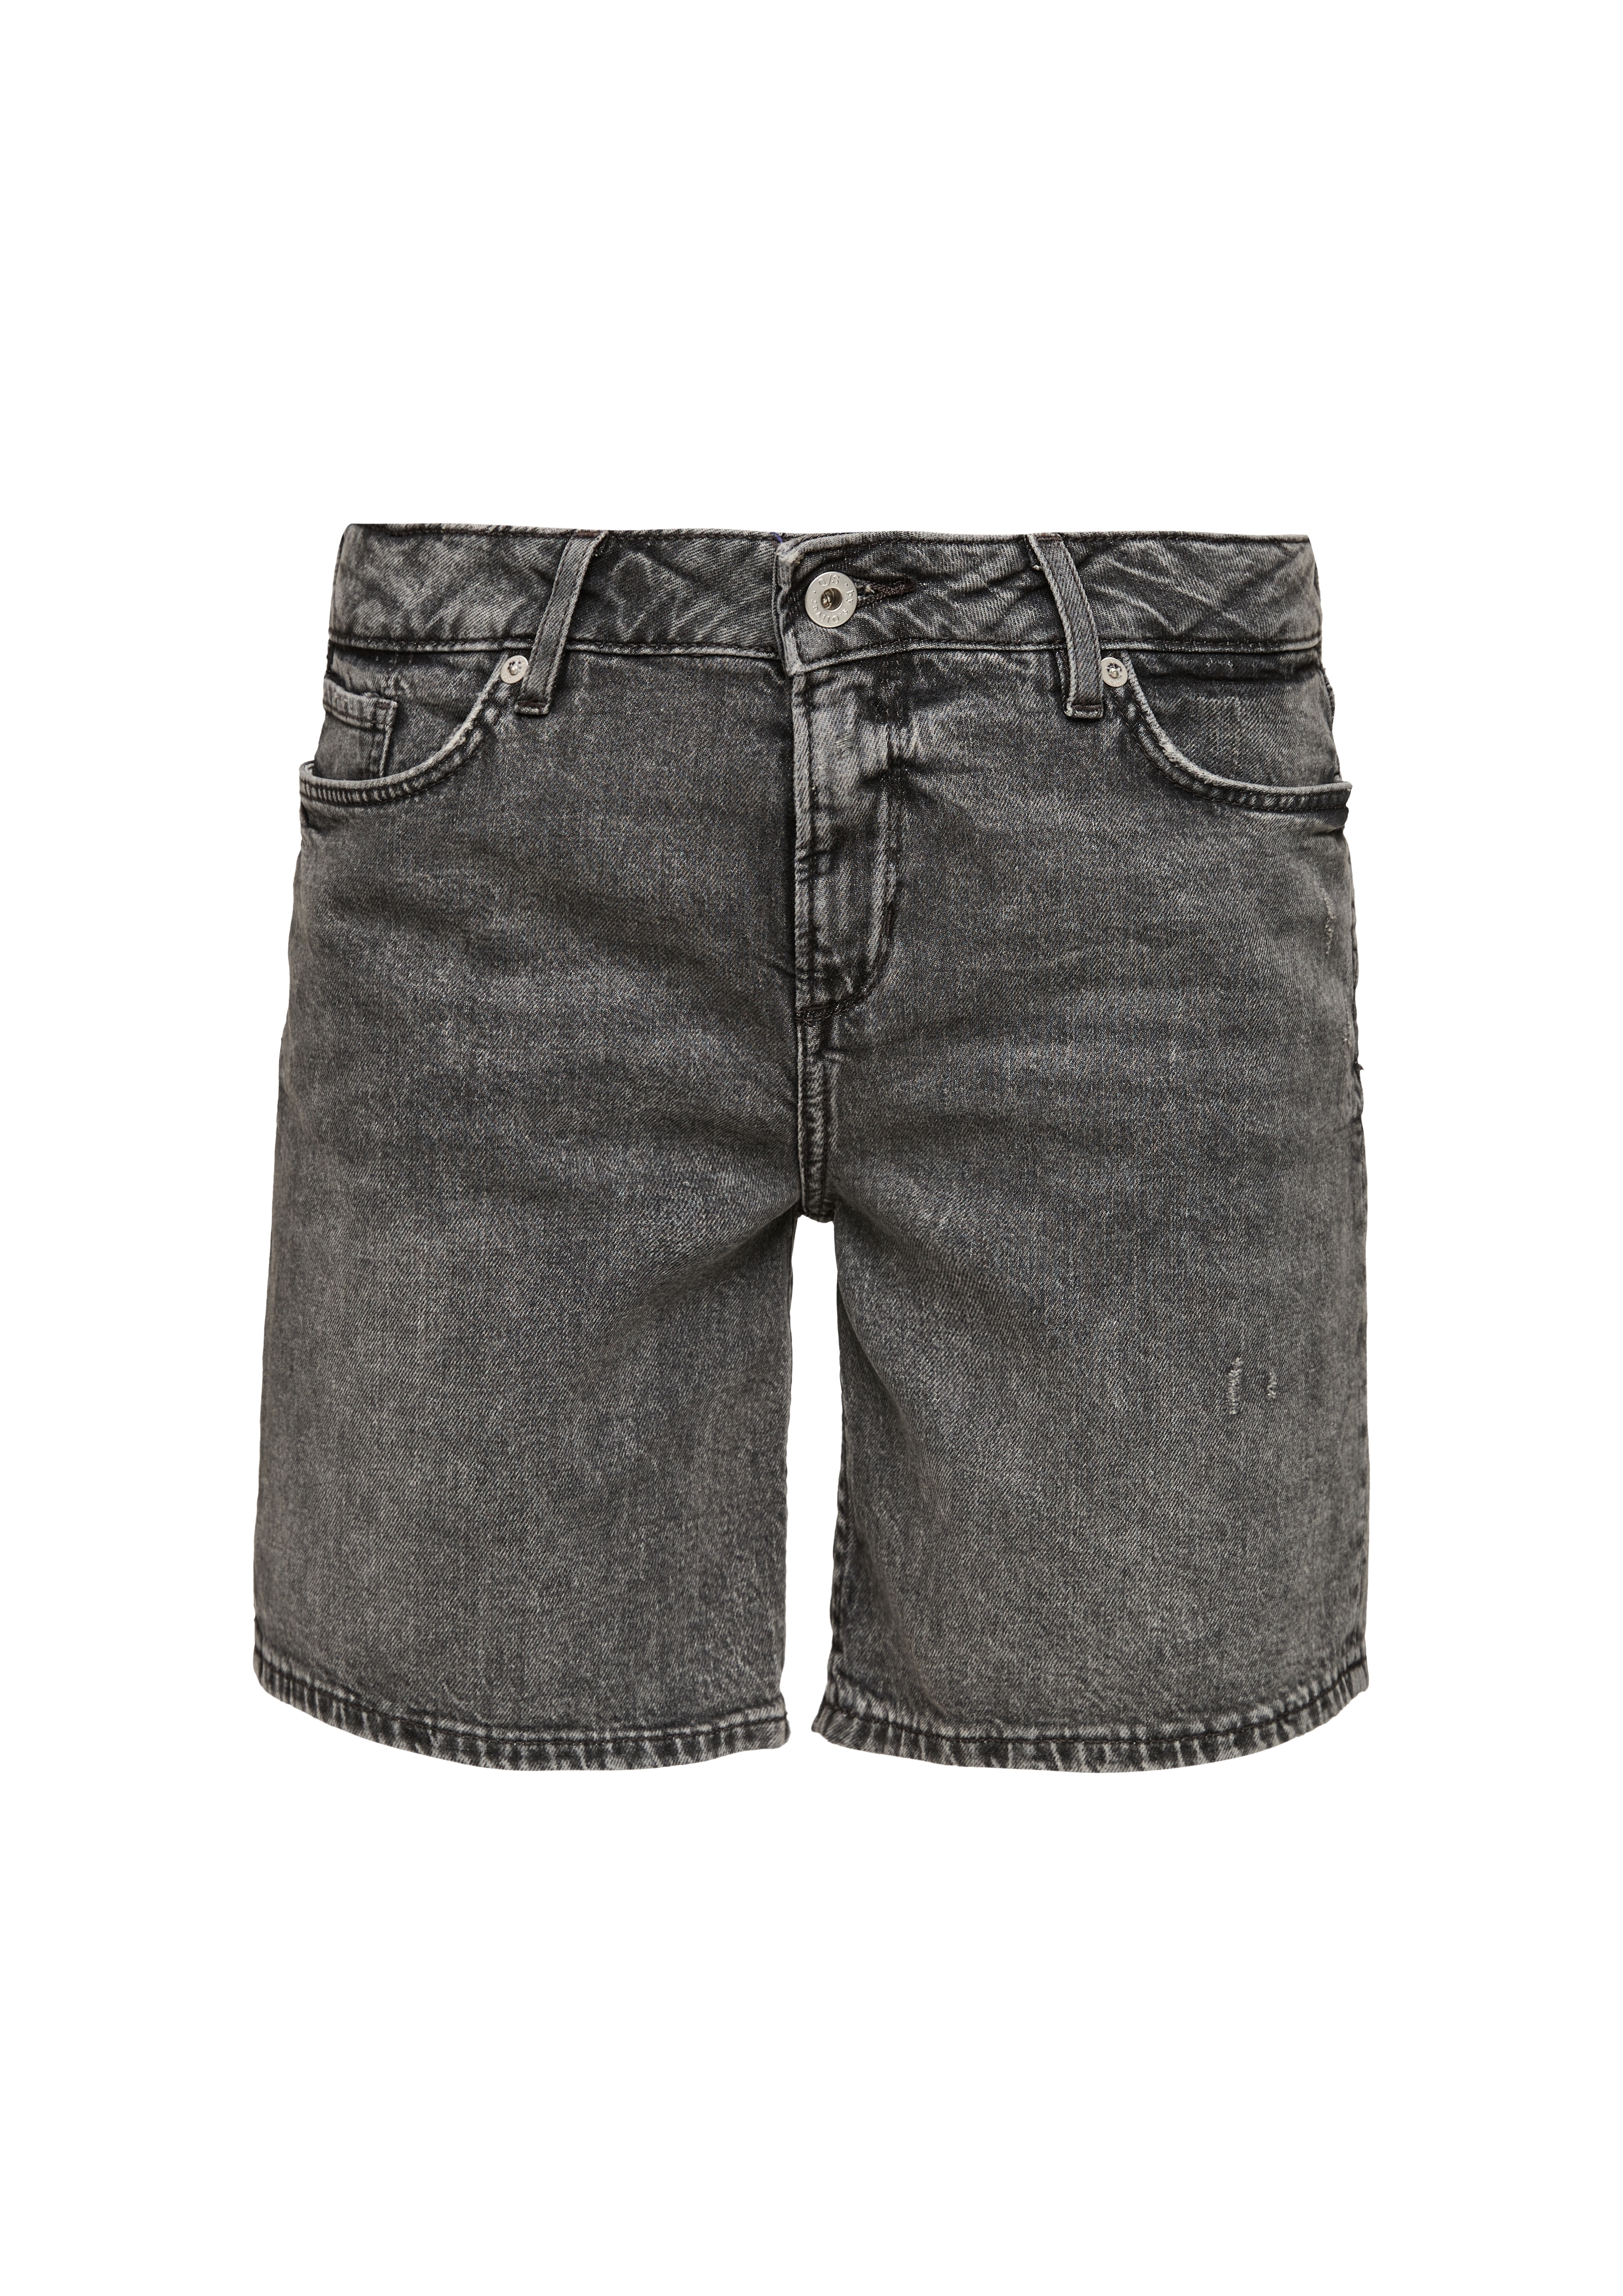 Q/S by s.Oliver Shorts in Grau 